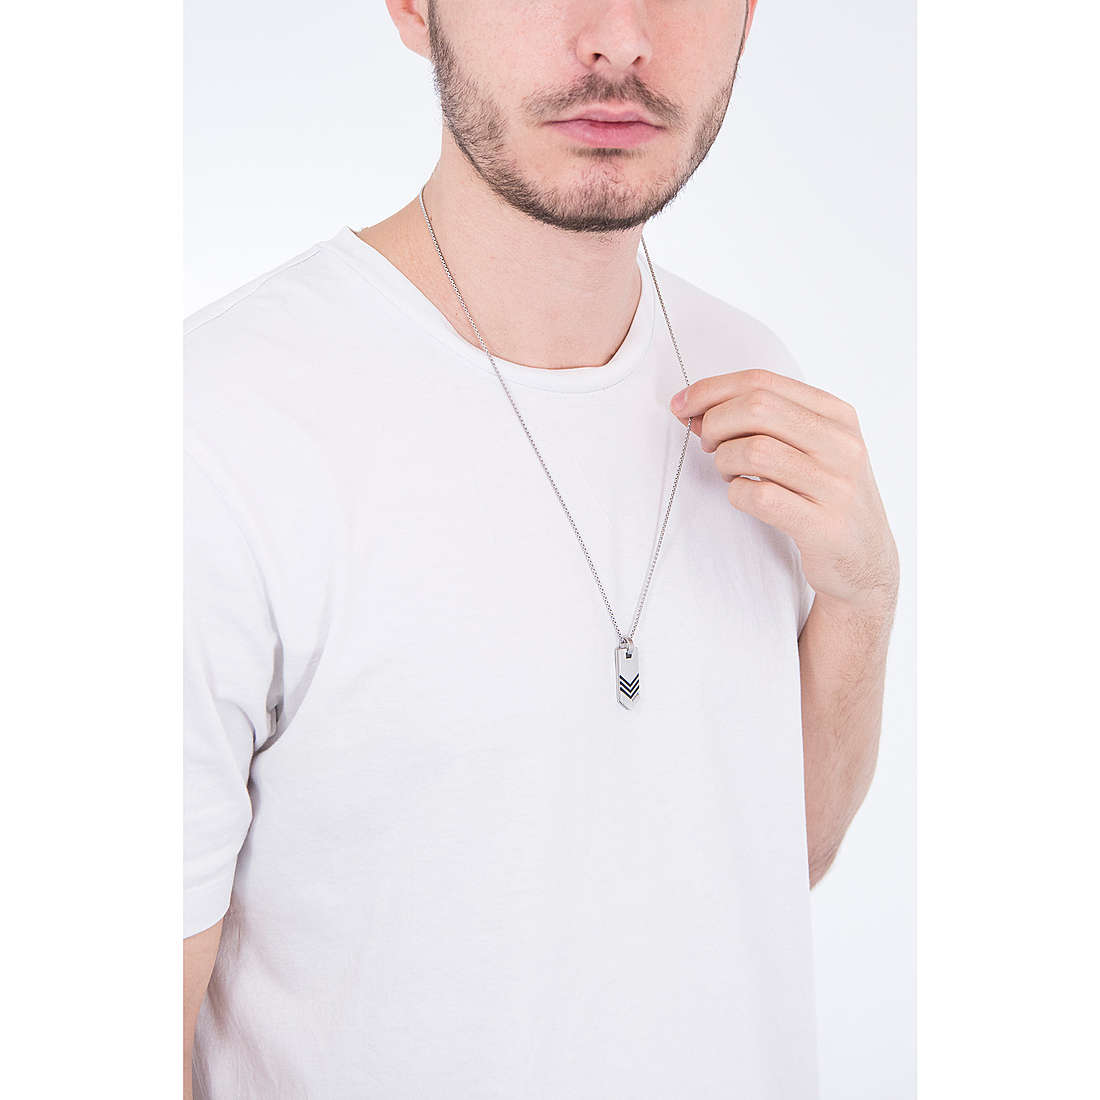 Fossil necklaces Spring 2020 man JF03394040 wearing